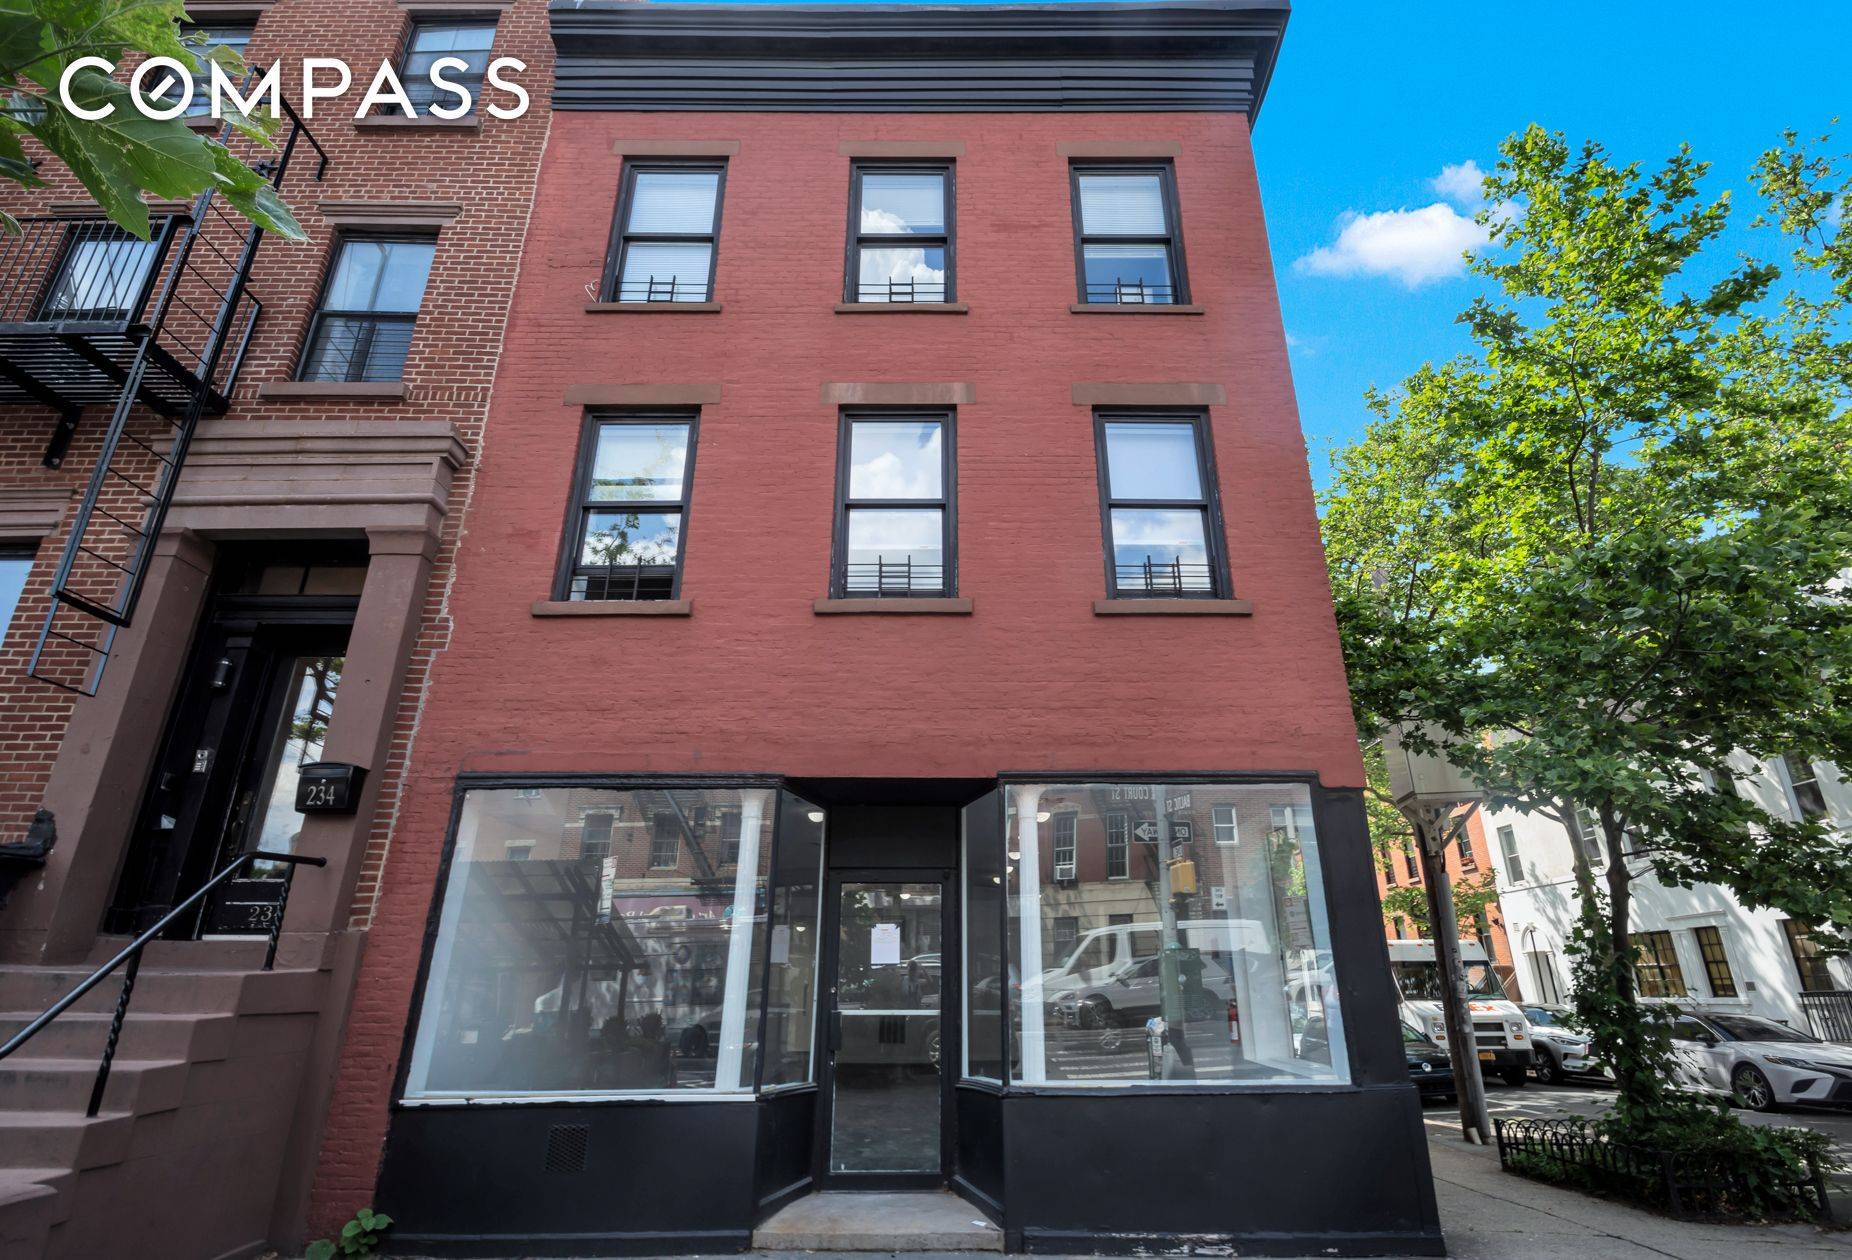 COBBLE HILL Huge Corner Commercial Space Available to Lease Prime Commercial space located at 232 Court Street with High Visibility and Foot traffic.